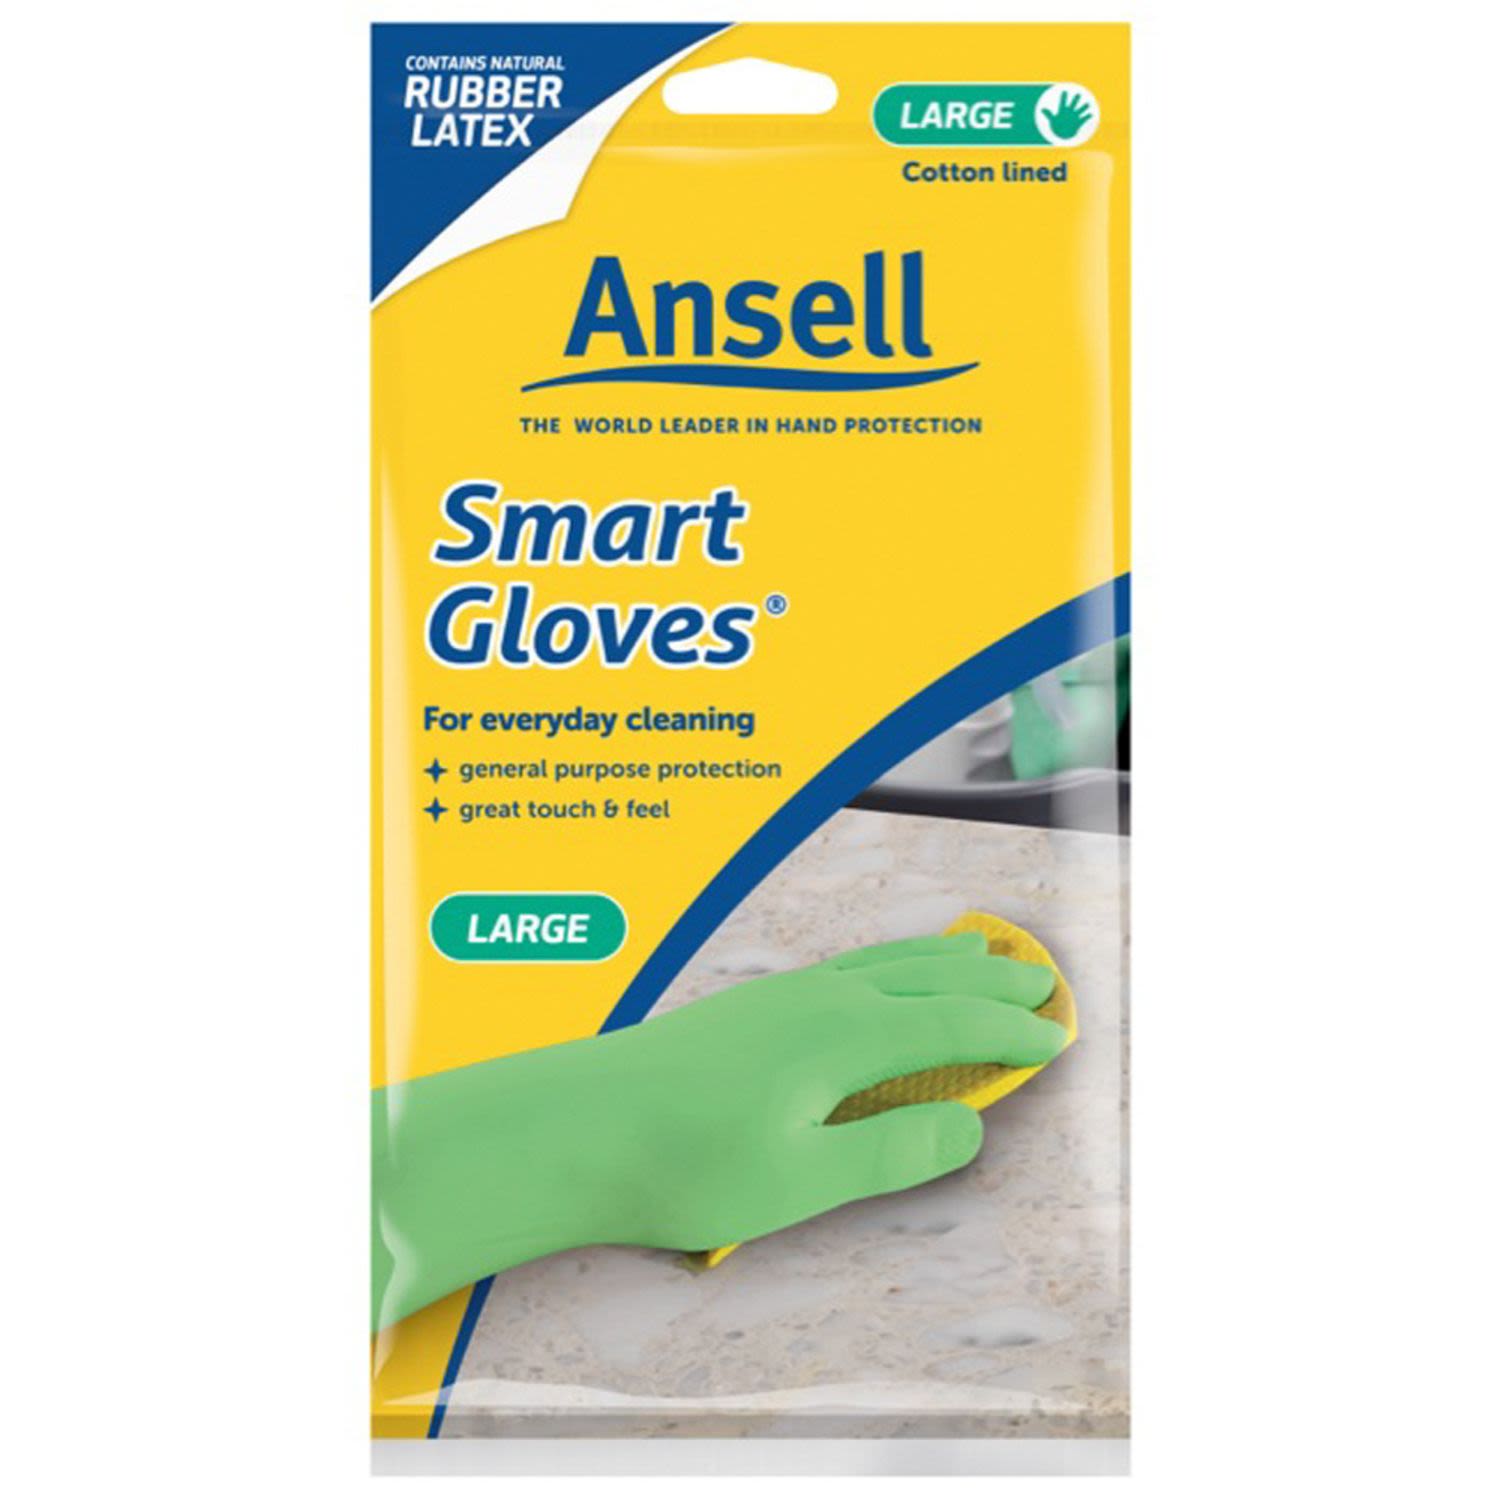 Ansell Gloves Smart Large, 1 Each